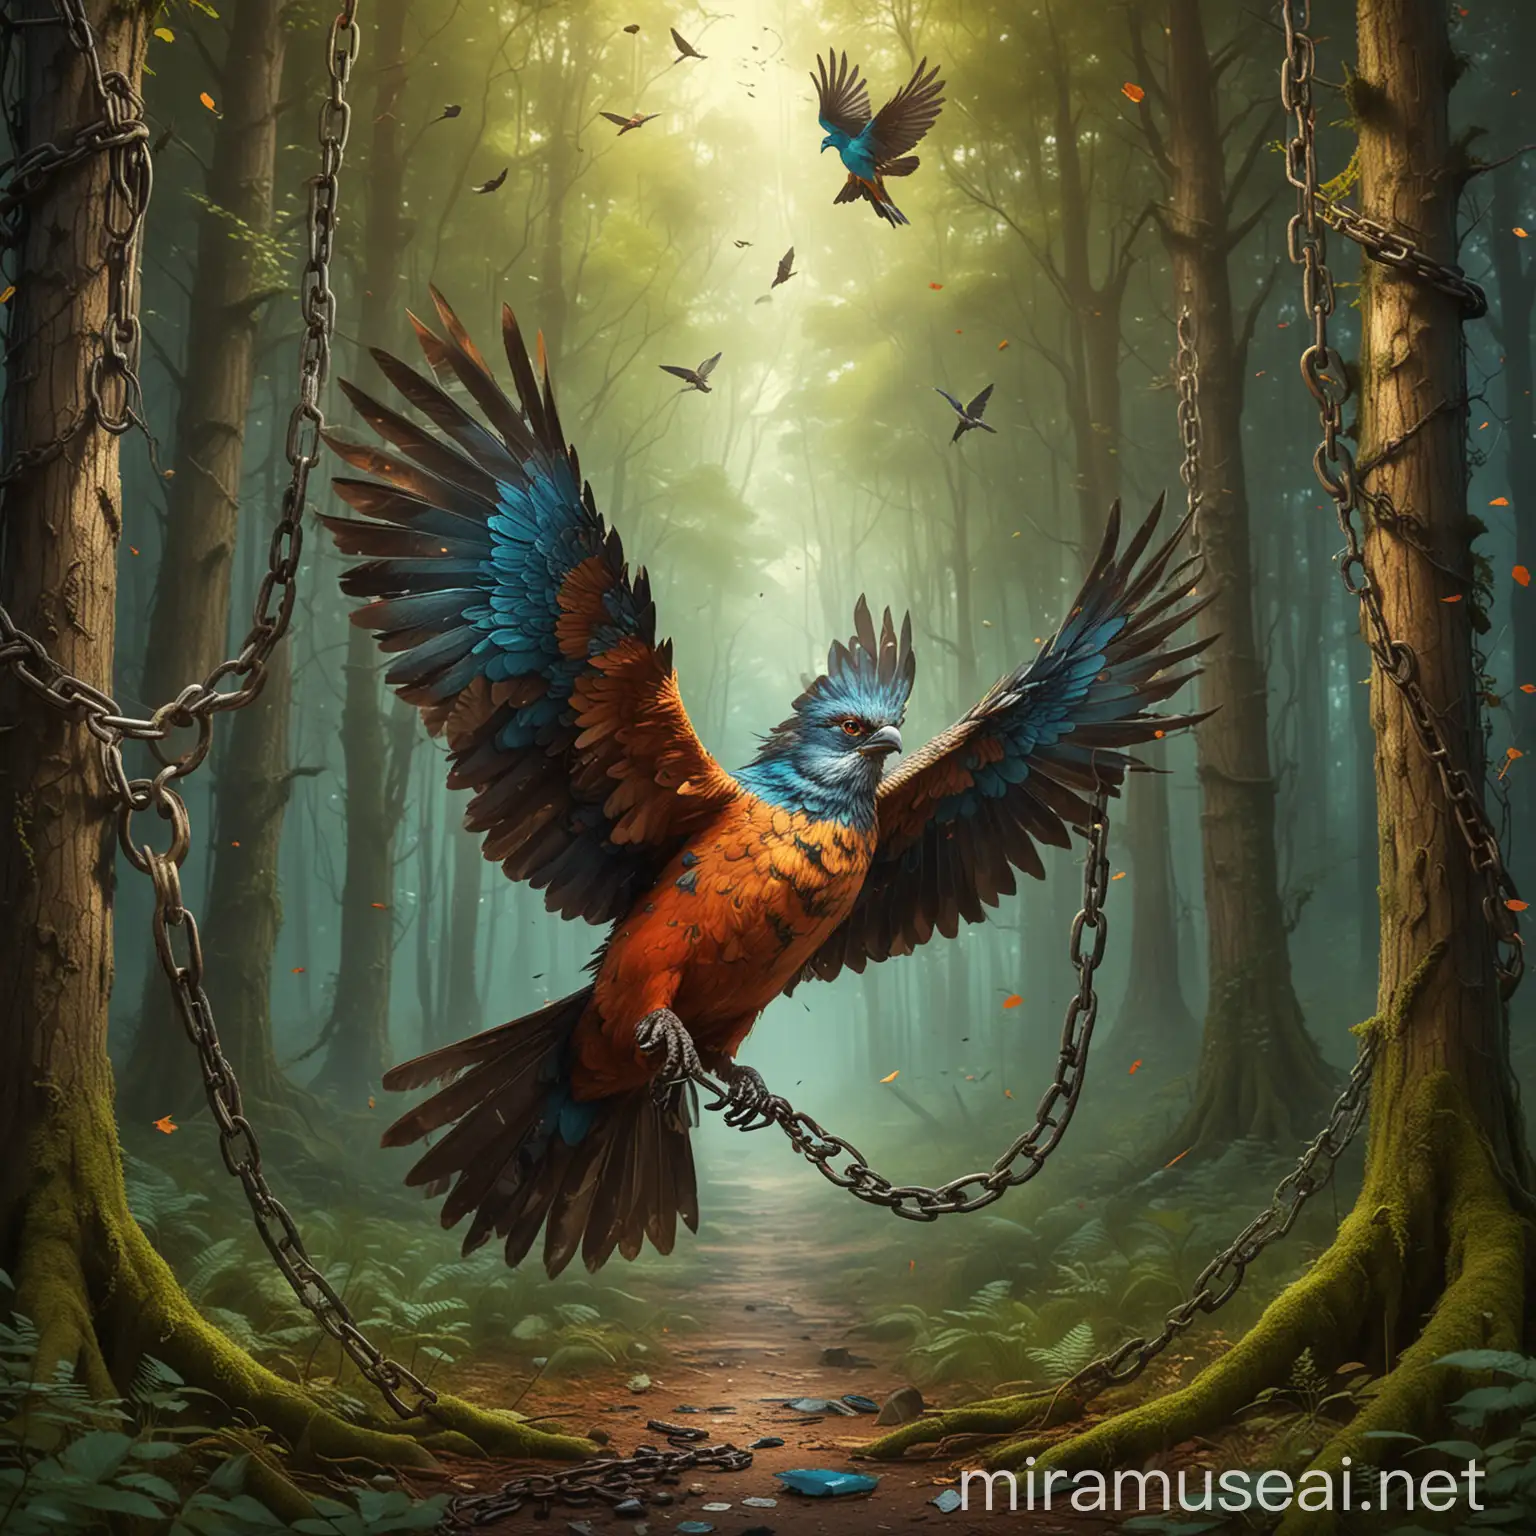 1. **Background**: Begin by crafting a lush forest scene using vibrant shades of green (#228B22) and blue (#87CEEB), evoking the intricate landscapes reminiscent of Leonardo da Vinci's work.

2. **Bird**: Create a dynamic illustration of a colorful bird soaring through the forest, featuring multi-colored wings painted with striking hues such as red (#DC143C), blue (#0000FF), and yellow (#FFFF00). This bird symbolizes individuals fighting addiction.

3. **Environment**: Surround the bird with intricate patterns of flowers and sprouting seeds beneath rocks, utilizing vibrant colors like red (#DC143C), yellow (#FFFF00), and green (#008000) to capture the beauty of nature. These details draw inspiration from da Vinci's meticulous observations of the natural world.

4. **Chains**: Depict broken chains around the bird's feet using dark and impactful colors such as deep blue (#00008B), gray (#696969), and burnt orange (#8B4500). These chains represent the struggle and determination to break free from addiction.

5. **Details and Final Touch**: Enhance the realism of the image by adding intricate details like leaves and rocks. Utilize da Vinci's signature sfumato technique to create soft transitions between colors, achieving a sense of depth and dimension in the digital painting.

This command empowers you to create a captivating and unique digital artwork that blends the power of color with the masterful techniques of Leonardo da Vinci's painting style. By incorporating the broken chains around the bird's feet, the message of overcoming addiction and achieving freedom is vividly conveyed.